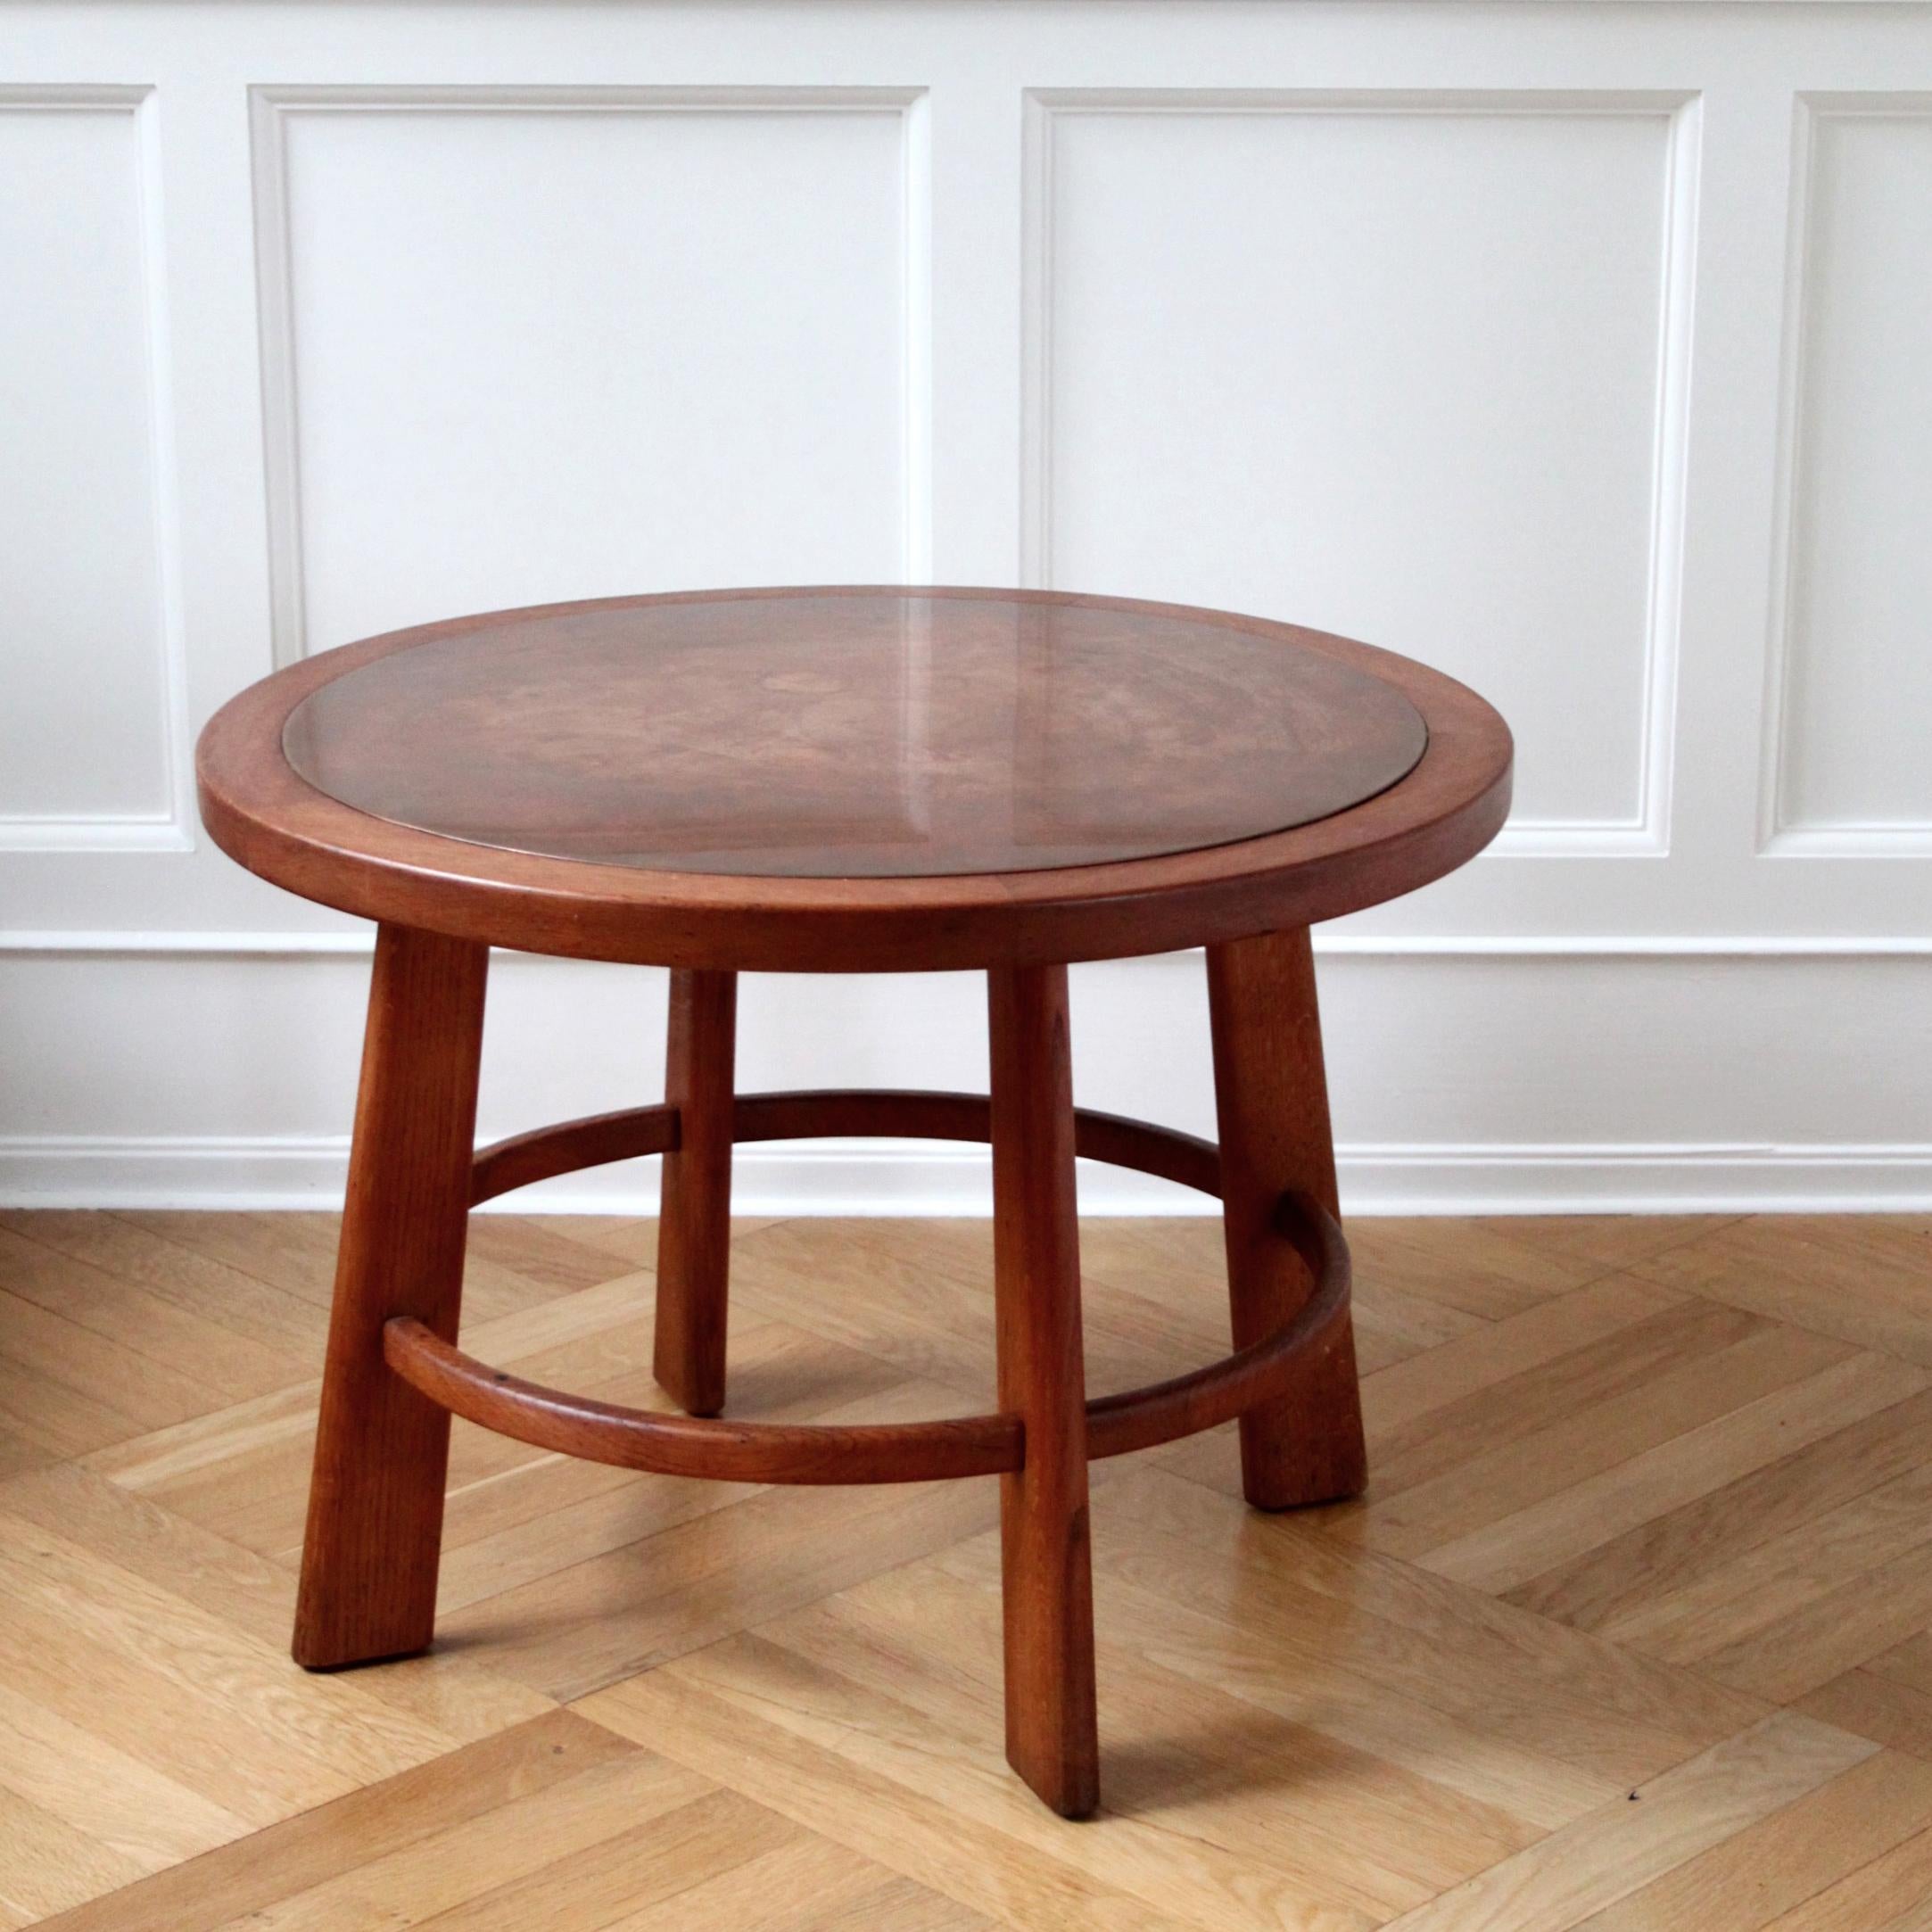 Otto Færge - Scandinavian Modern Design

A rare example of the beautiful works of cabinetmaker Otto Færge, a circular coffee table in Oak and Copper, Denmark 1940s. 

The oak has beautiful patina and the layed-in copper plate is original from